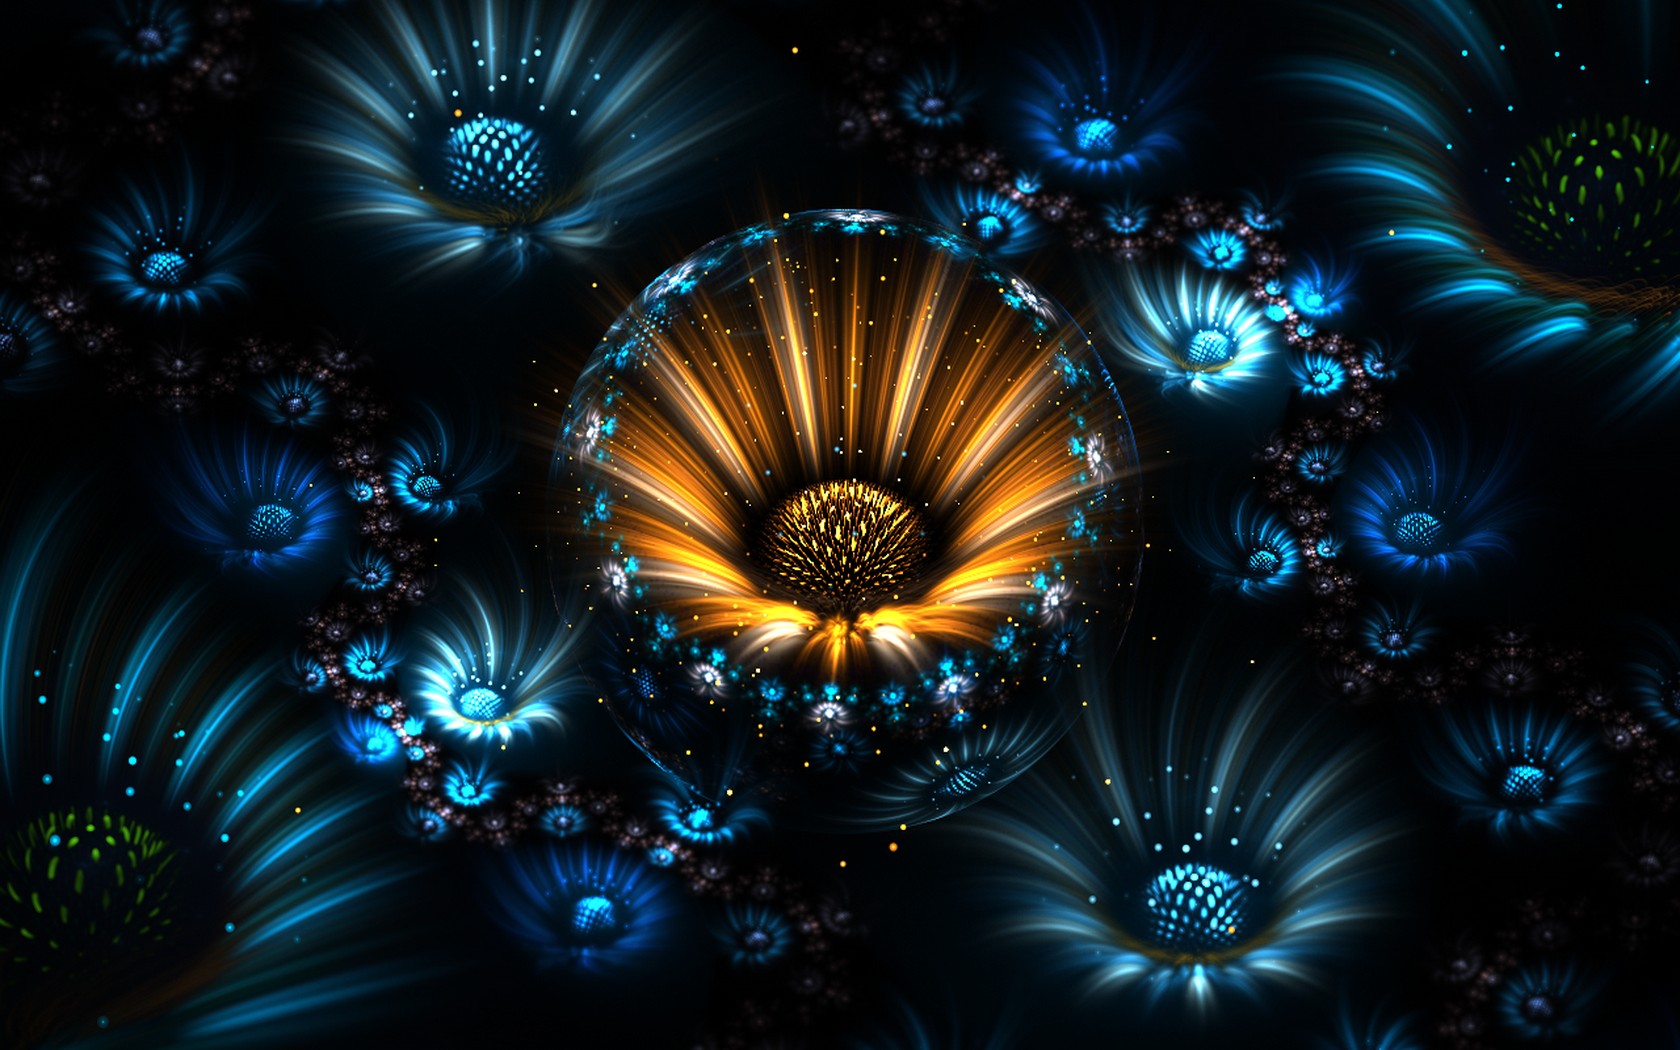 Abstract Fractal Background